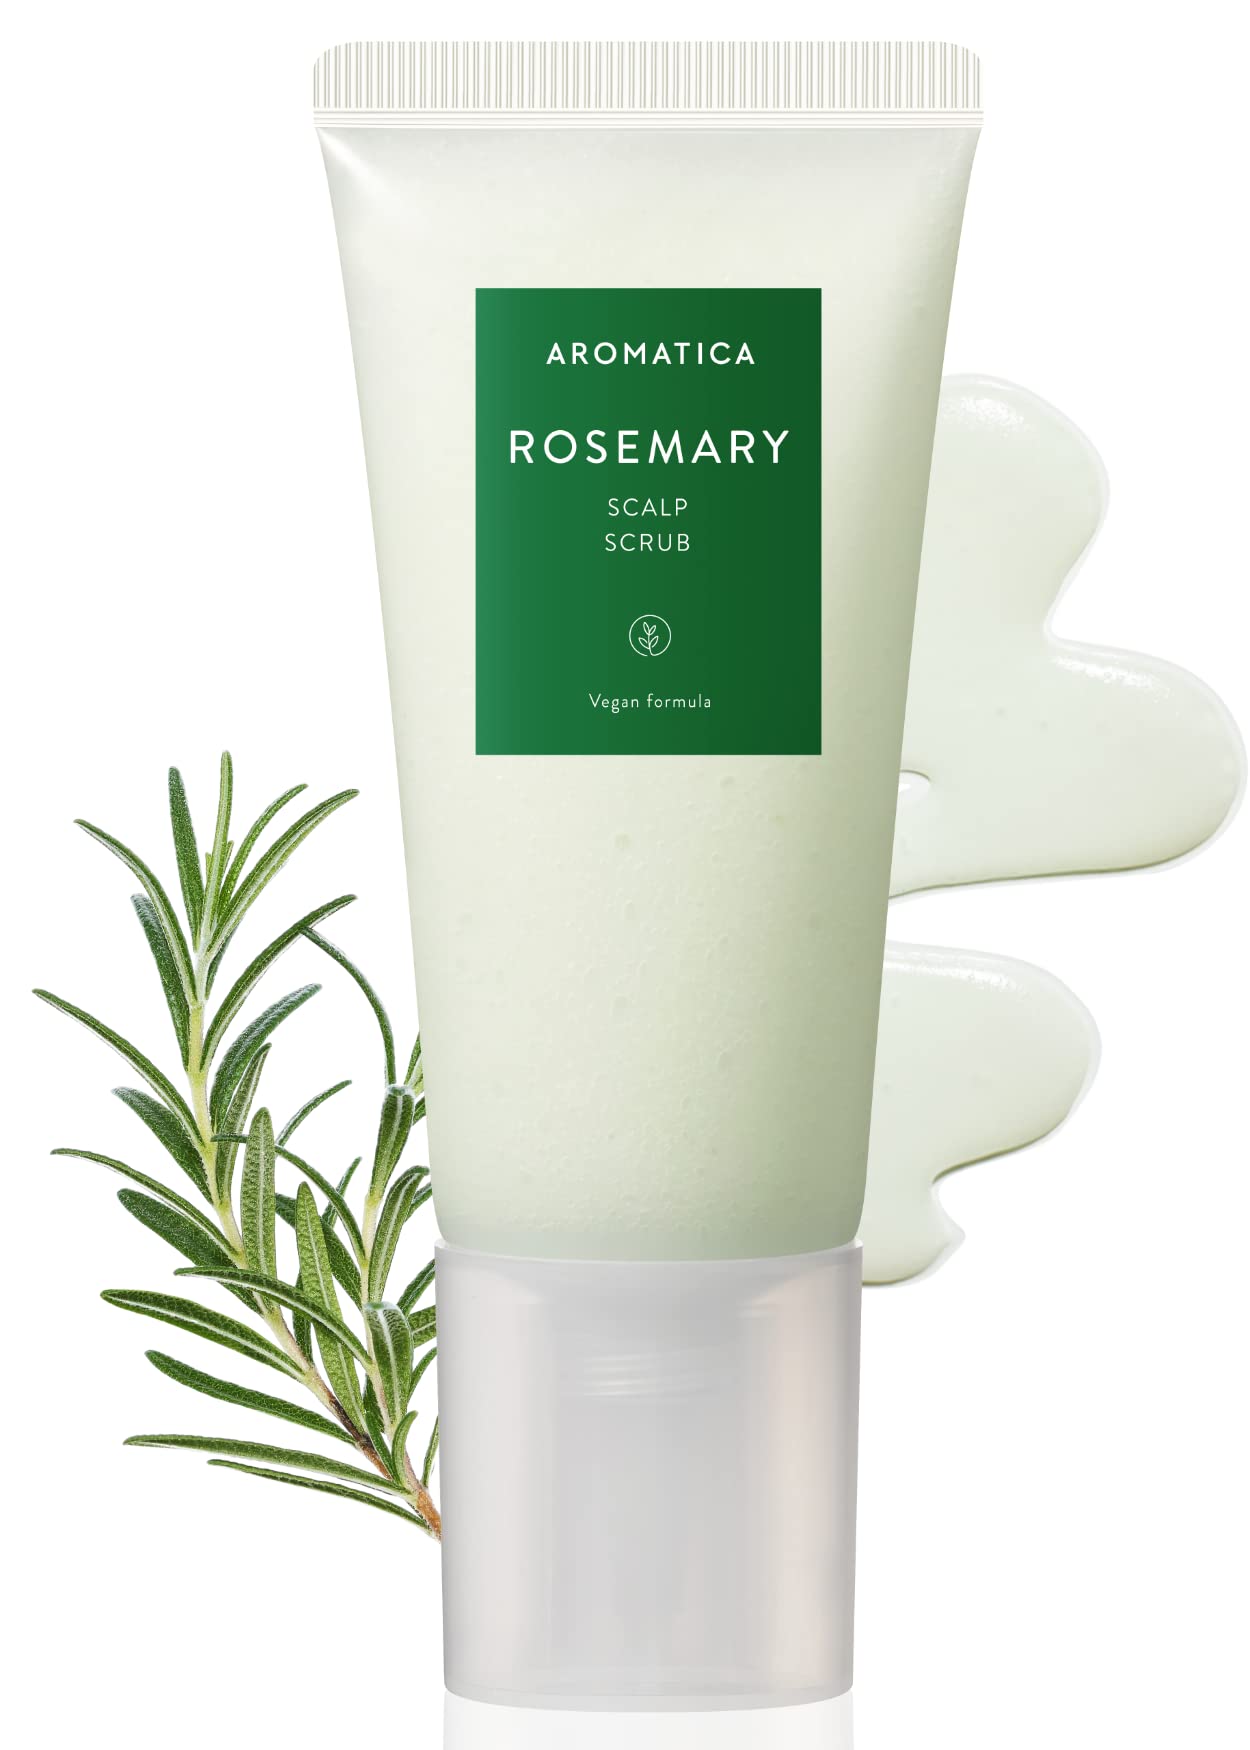 AROMATICA Rosemary Scalp Scrub 5.82oz / 165g Sulfate-Free Silicone-Free  Vegan Cleansing with Salt Granules Invigorates and Exfoliates Scalp  Micro-Exfoliate 5.82 Ounce (Pack of 1)